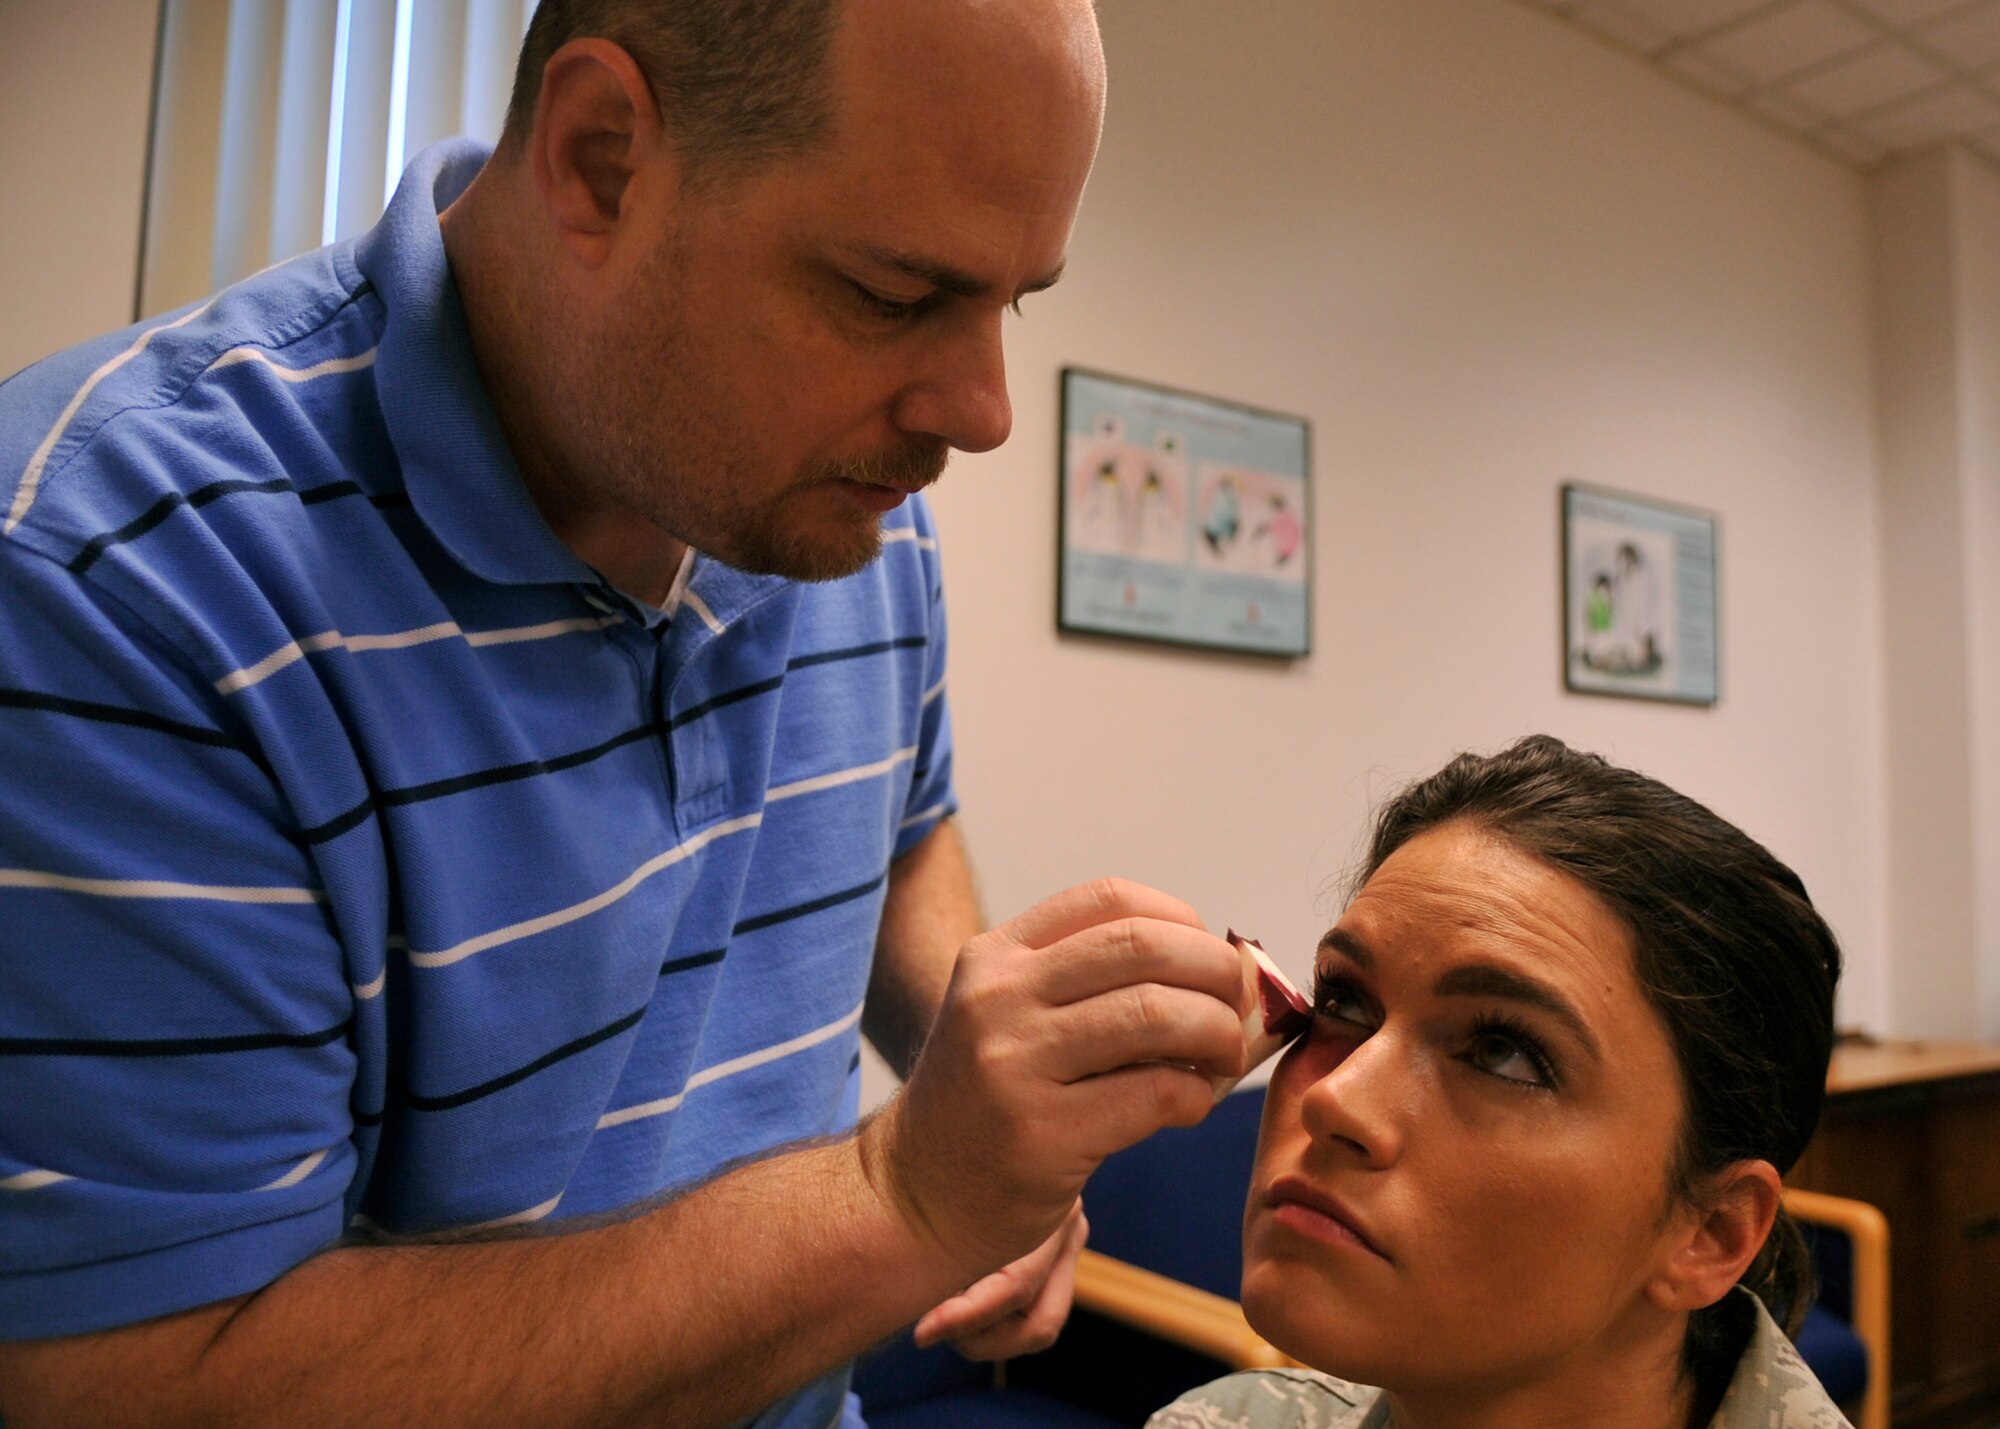 Phillip Calla, 325th Medical Support Squadron information technician, applies make-up to Staff. Sgt. Brittney Mendiola, 325 Civil Engineer Squadron base fire inspector, in preparation for the black eye campaign on Oct. 1 at Tyndall Air Force Base, Fla. The black eye campaign was done to raise awareness of domestic violence awareness month. (U.S. Photo by Airman 1st Class Ty-Rico Lea)